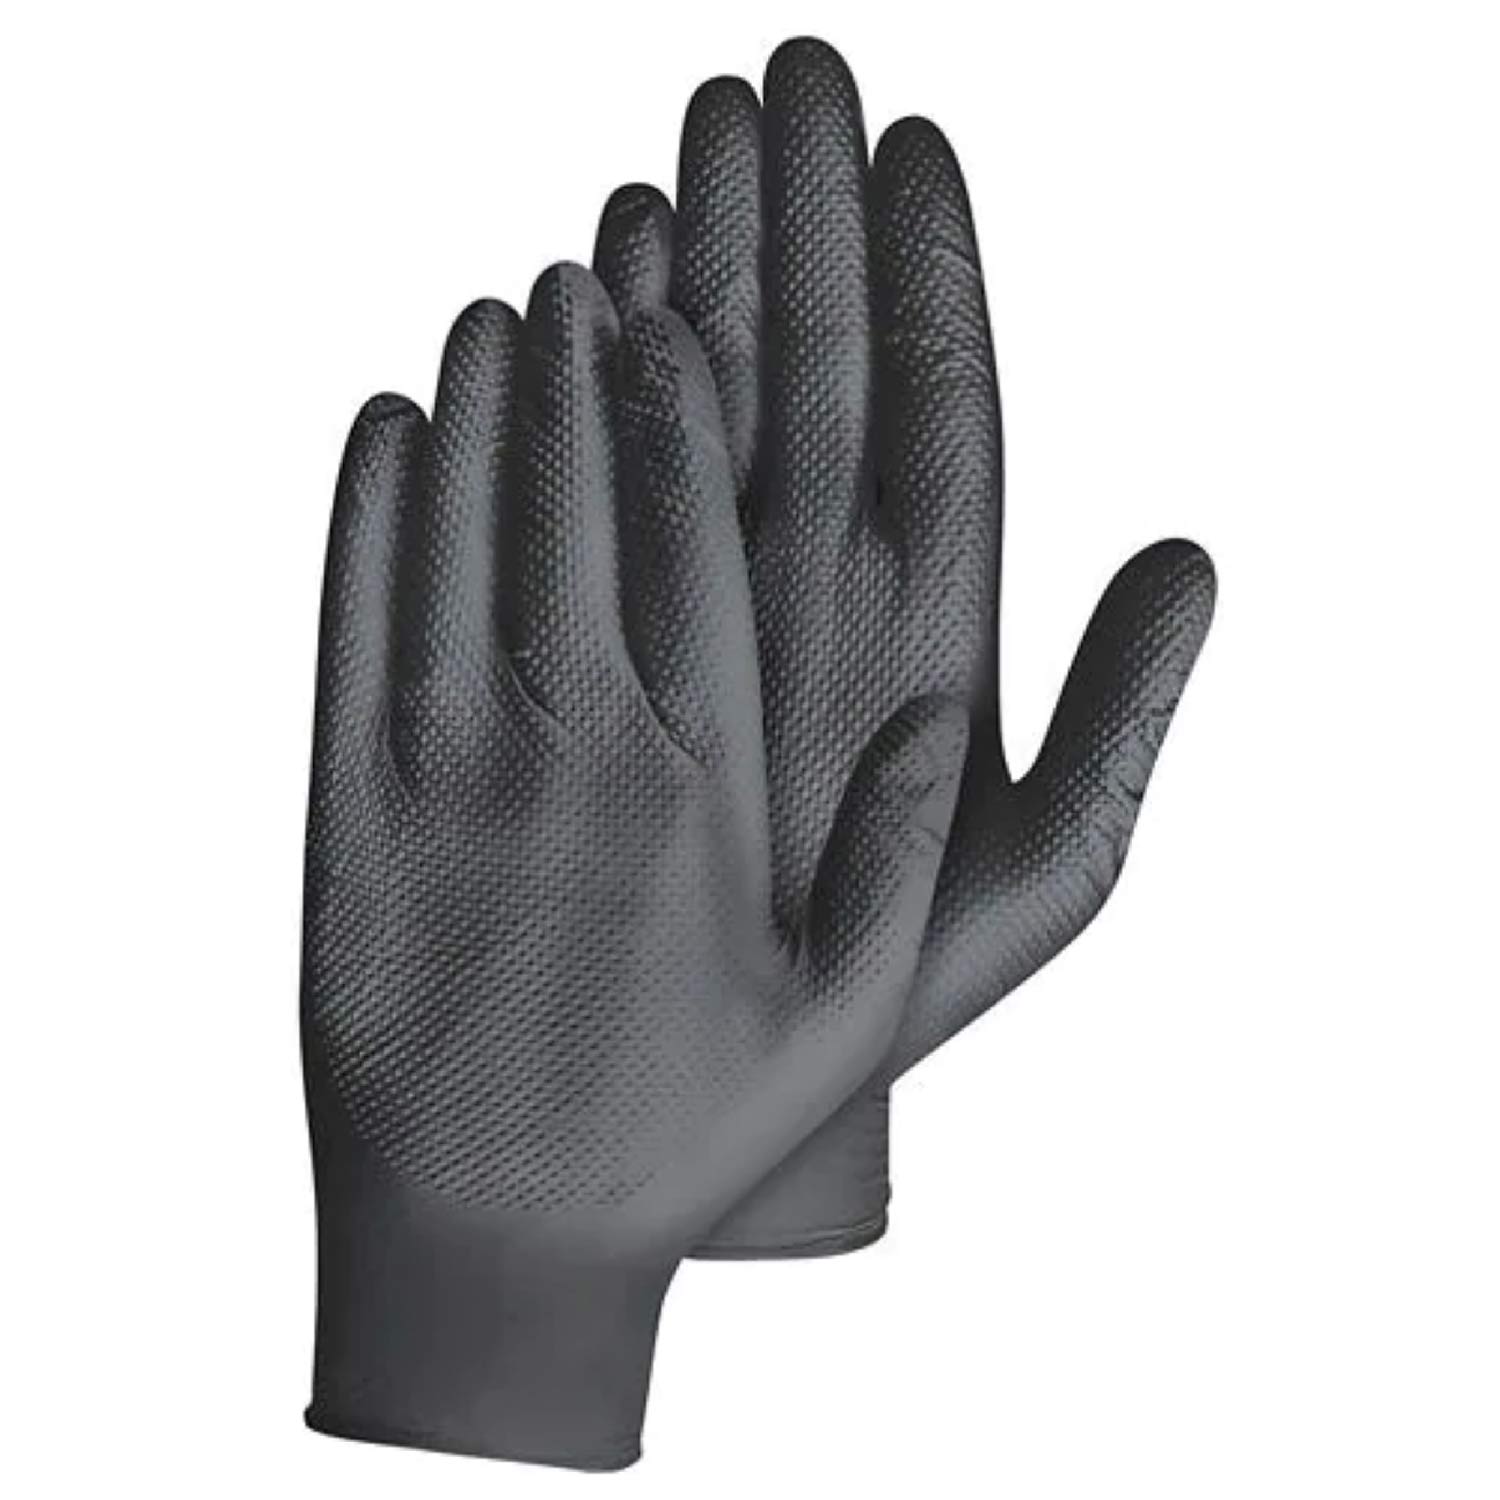 Black Boss Powder Free Disposable Nitrile Gloves 4 Mil Thickness X-Large, B21051-XL 100 Pair Pack 